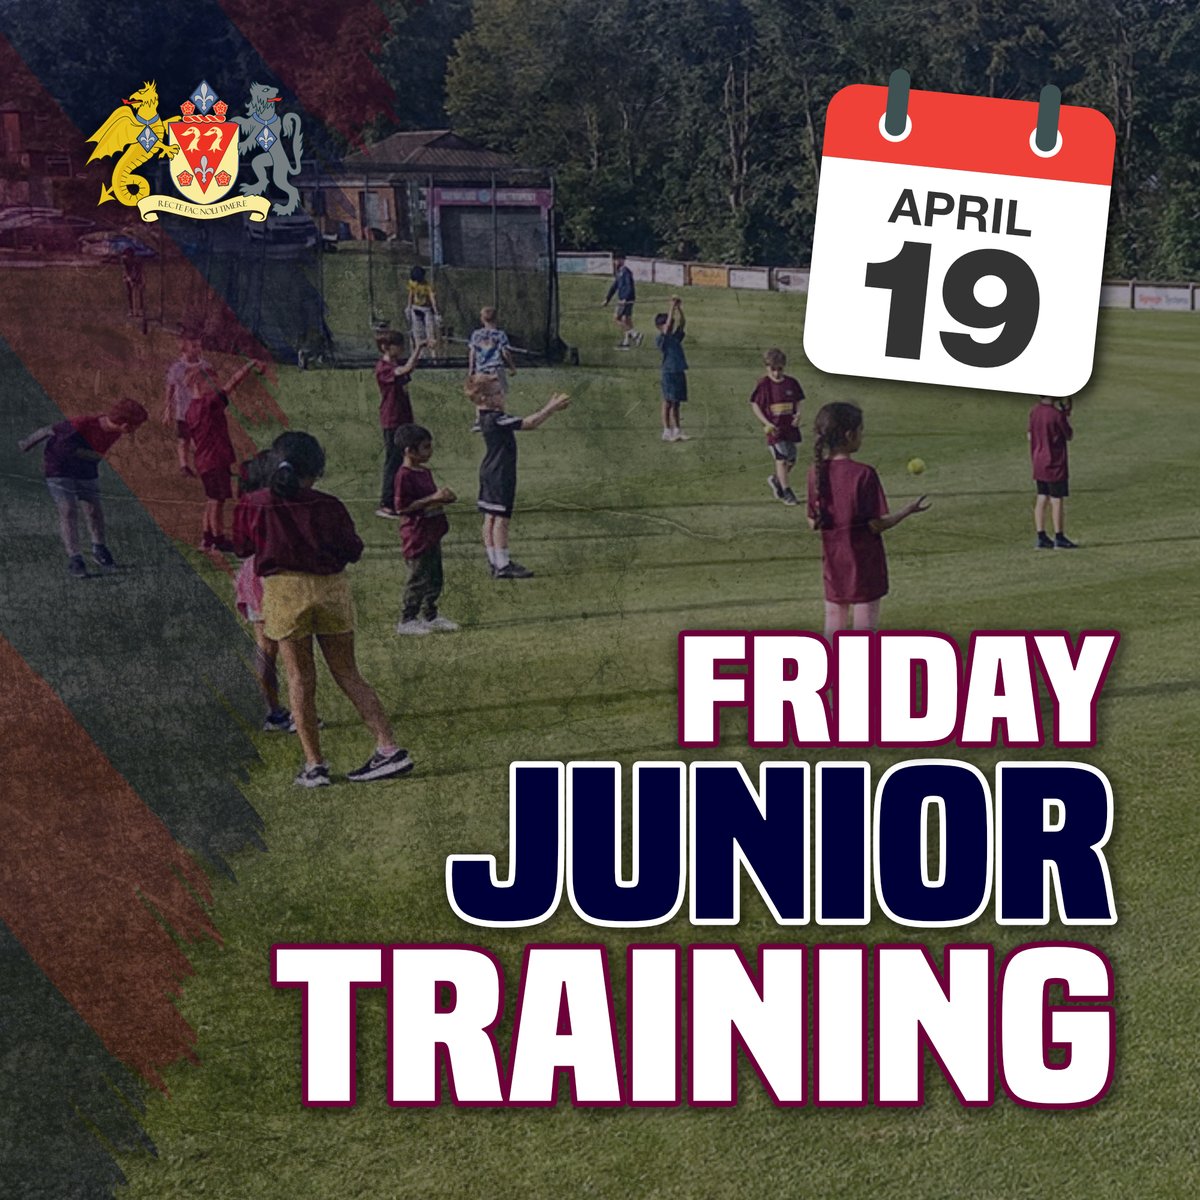 The start of Friday night junior training has been delayed a further week. We are now aiming to begin outdoor training for junior players (aged 7 to 18) on Friday April 19th, hoping the weather relents! Read more⬇️ pctb.club/BlNU1